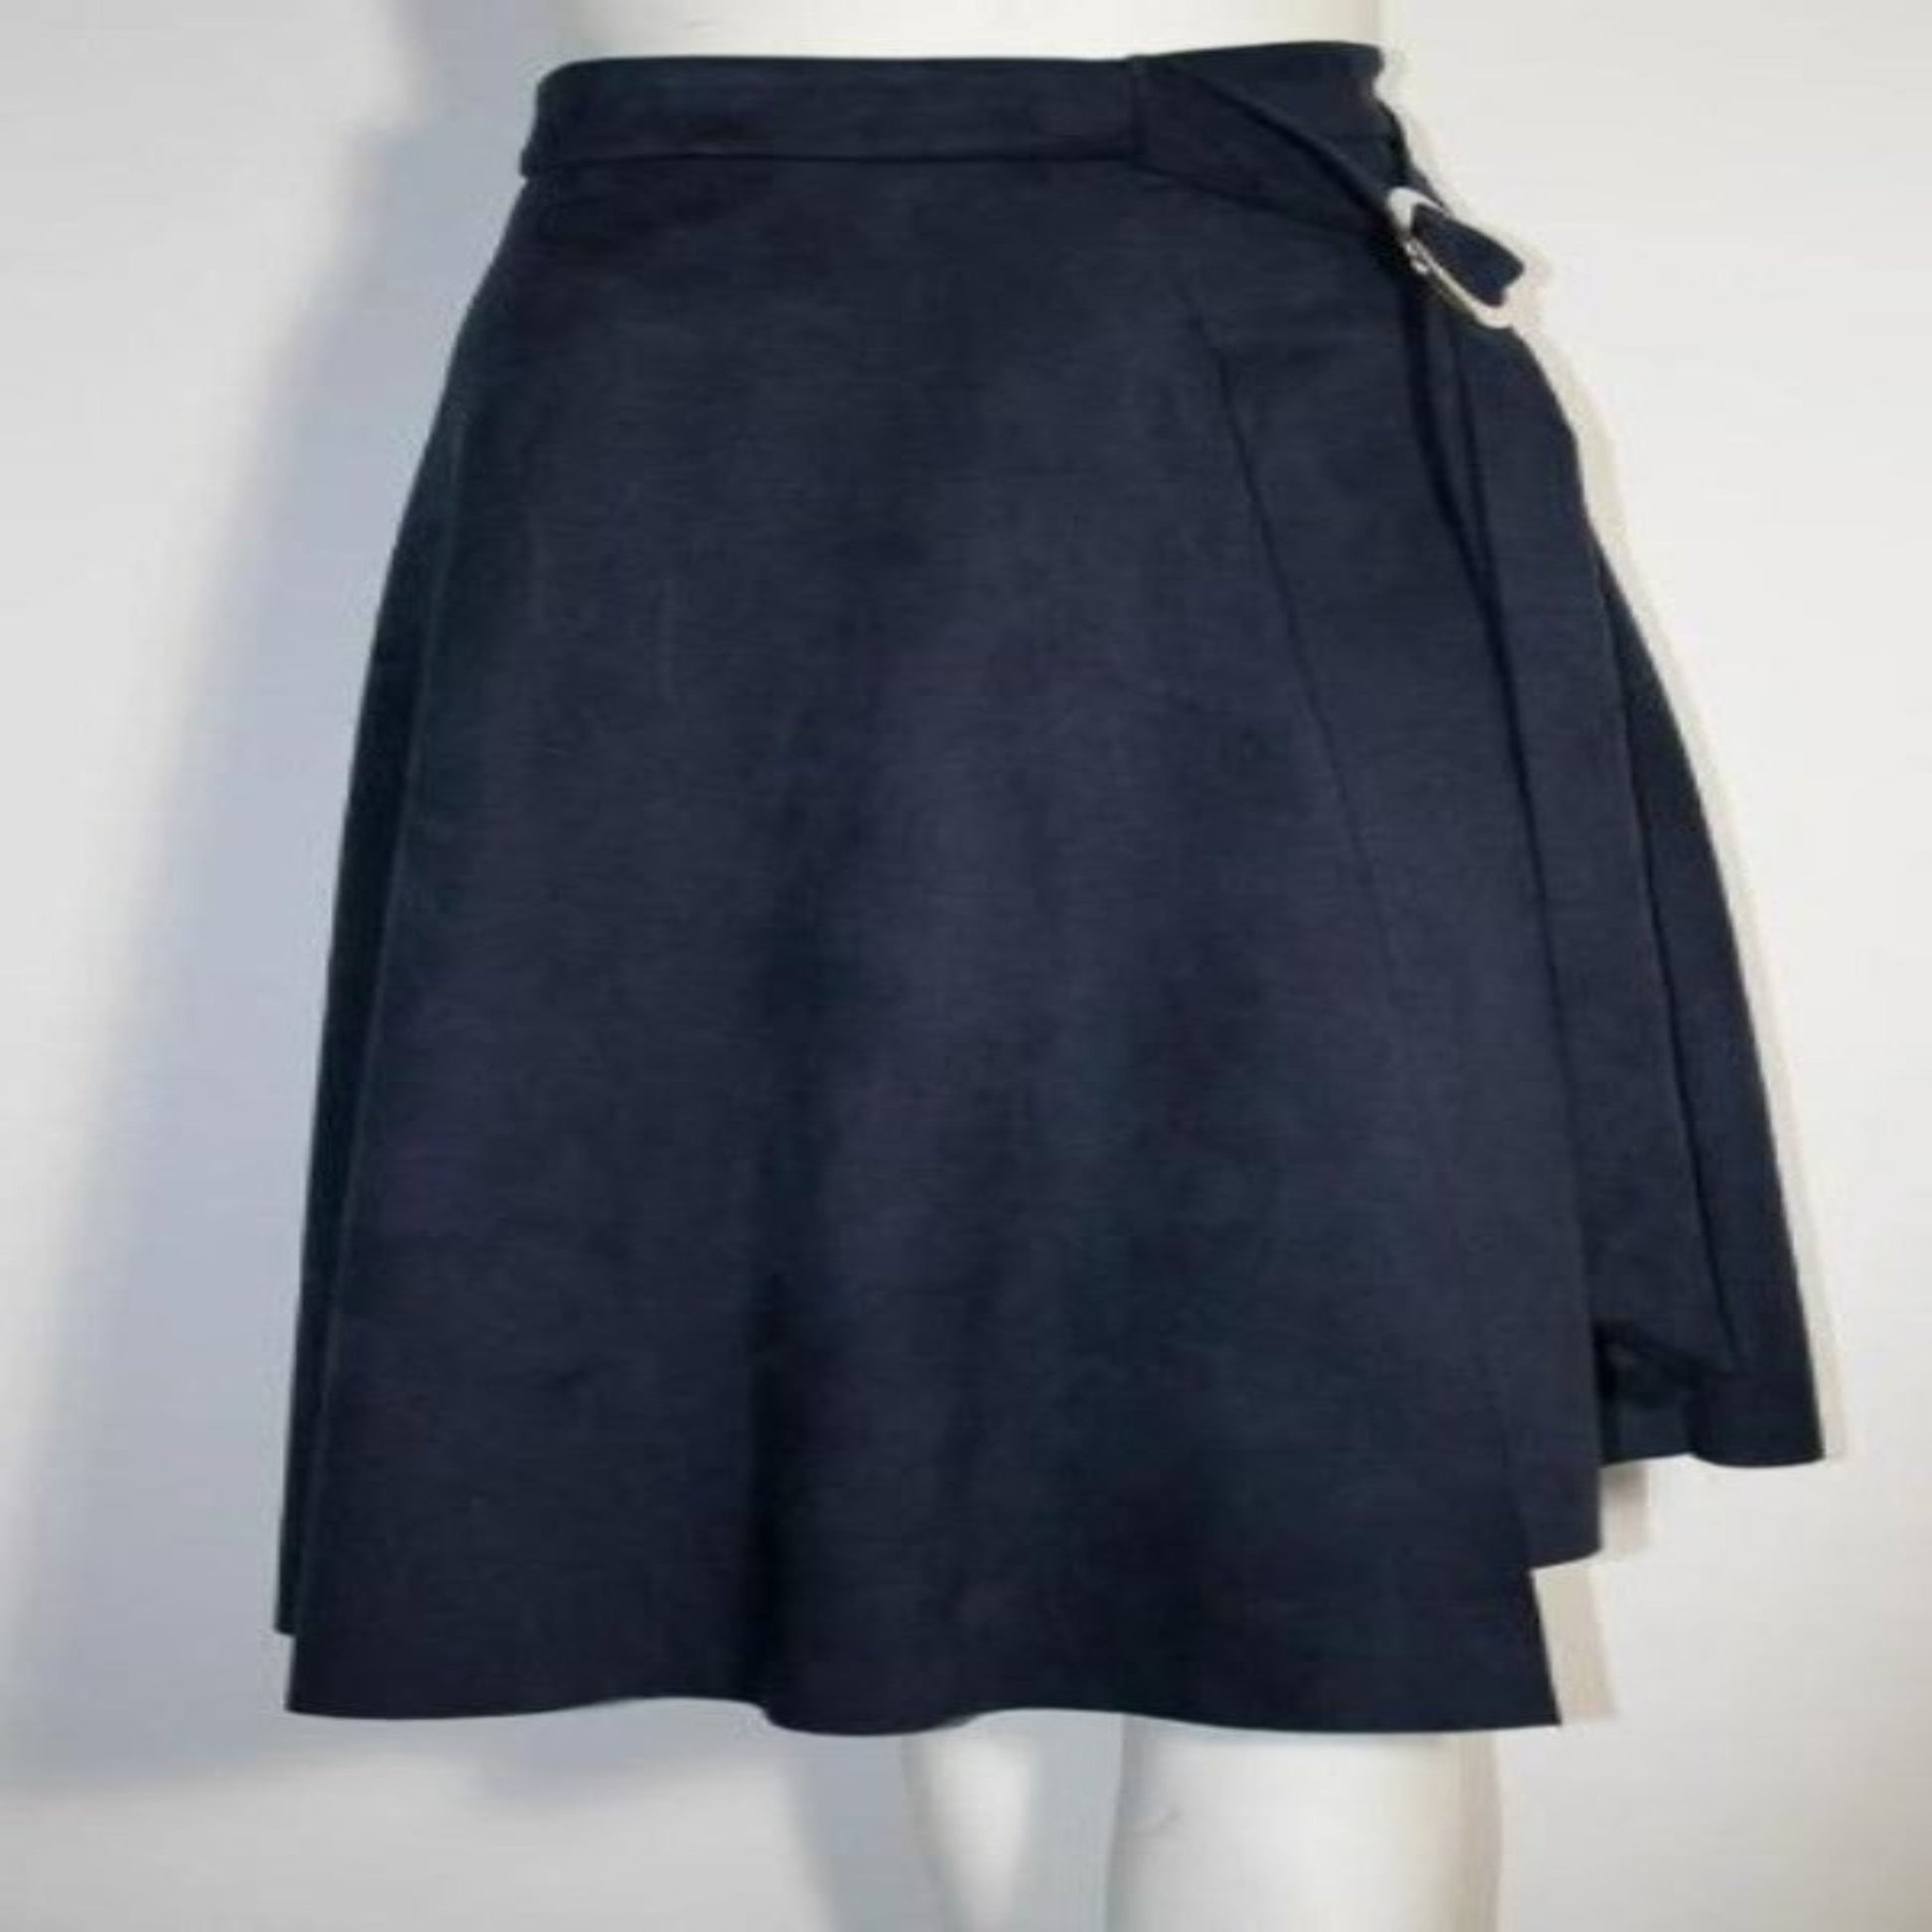 Black A-Line Faux Suede Skirt with buckle